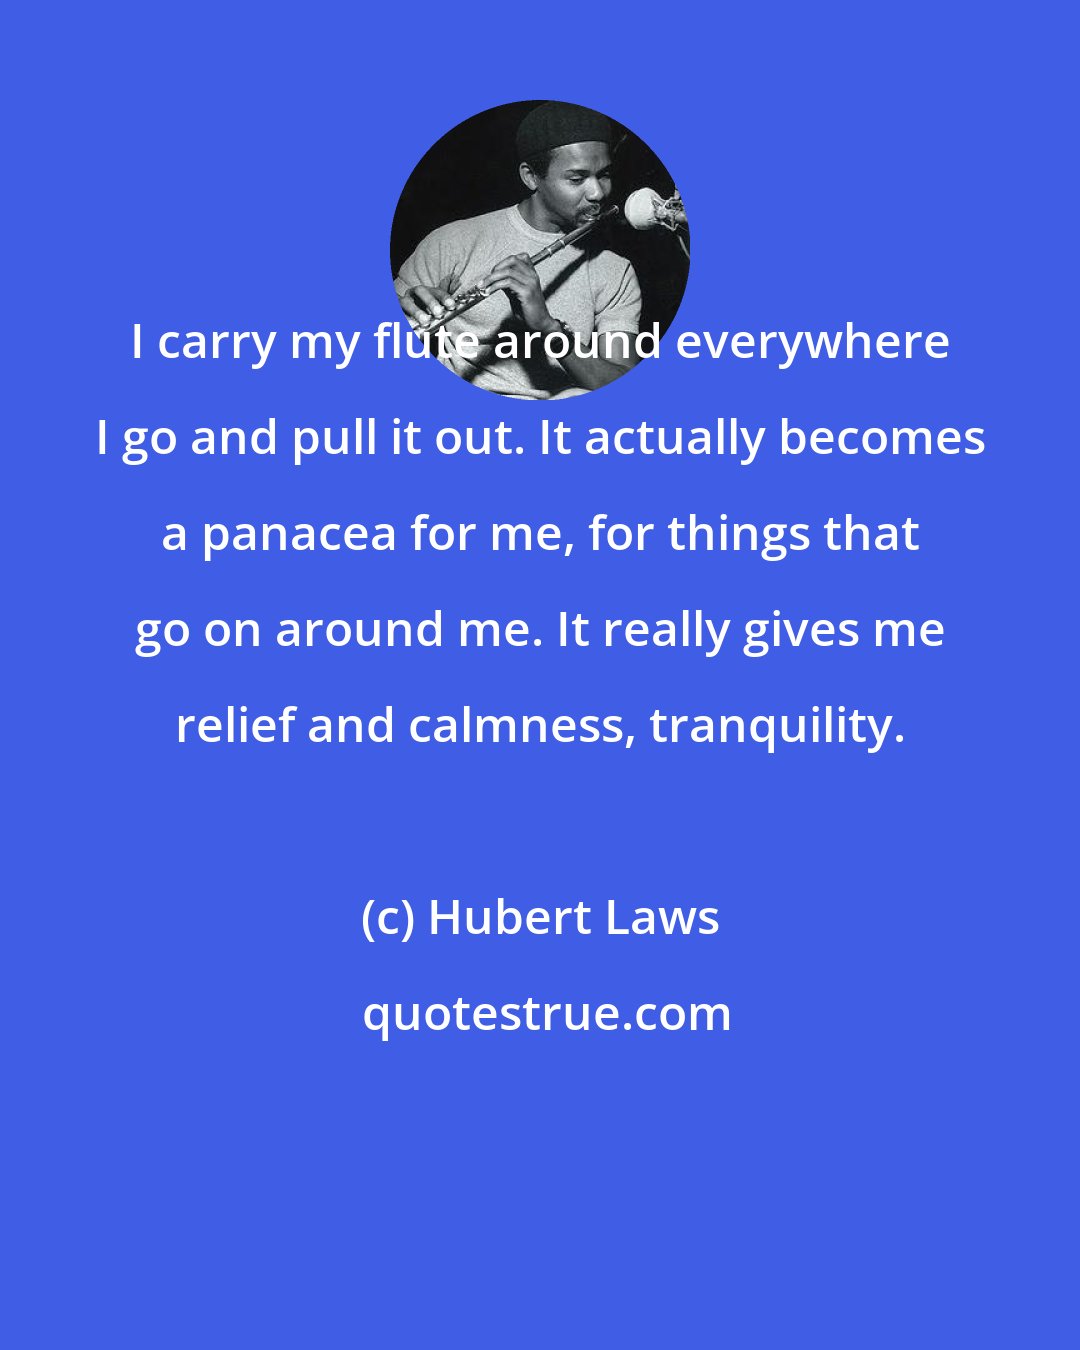 Hubert Laws: I carry my flute around everywhere I go and pull it out. It actually becomes a panacea for me, for things that go on around me. It really gives me relief and calmness, tranquility.